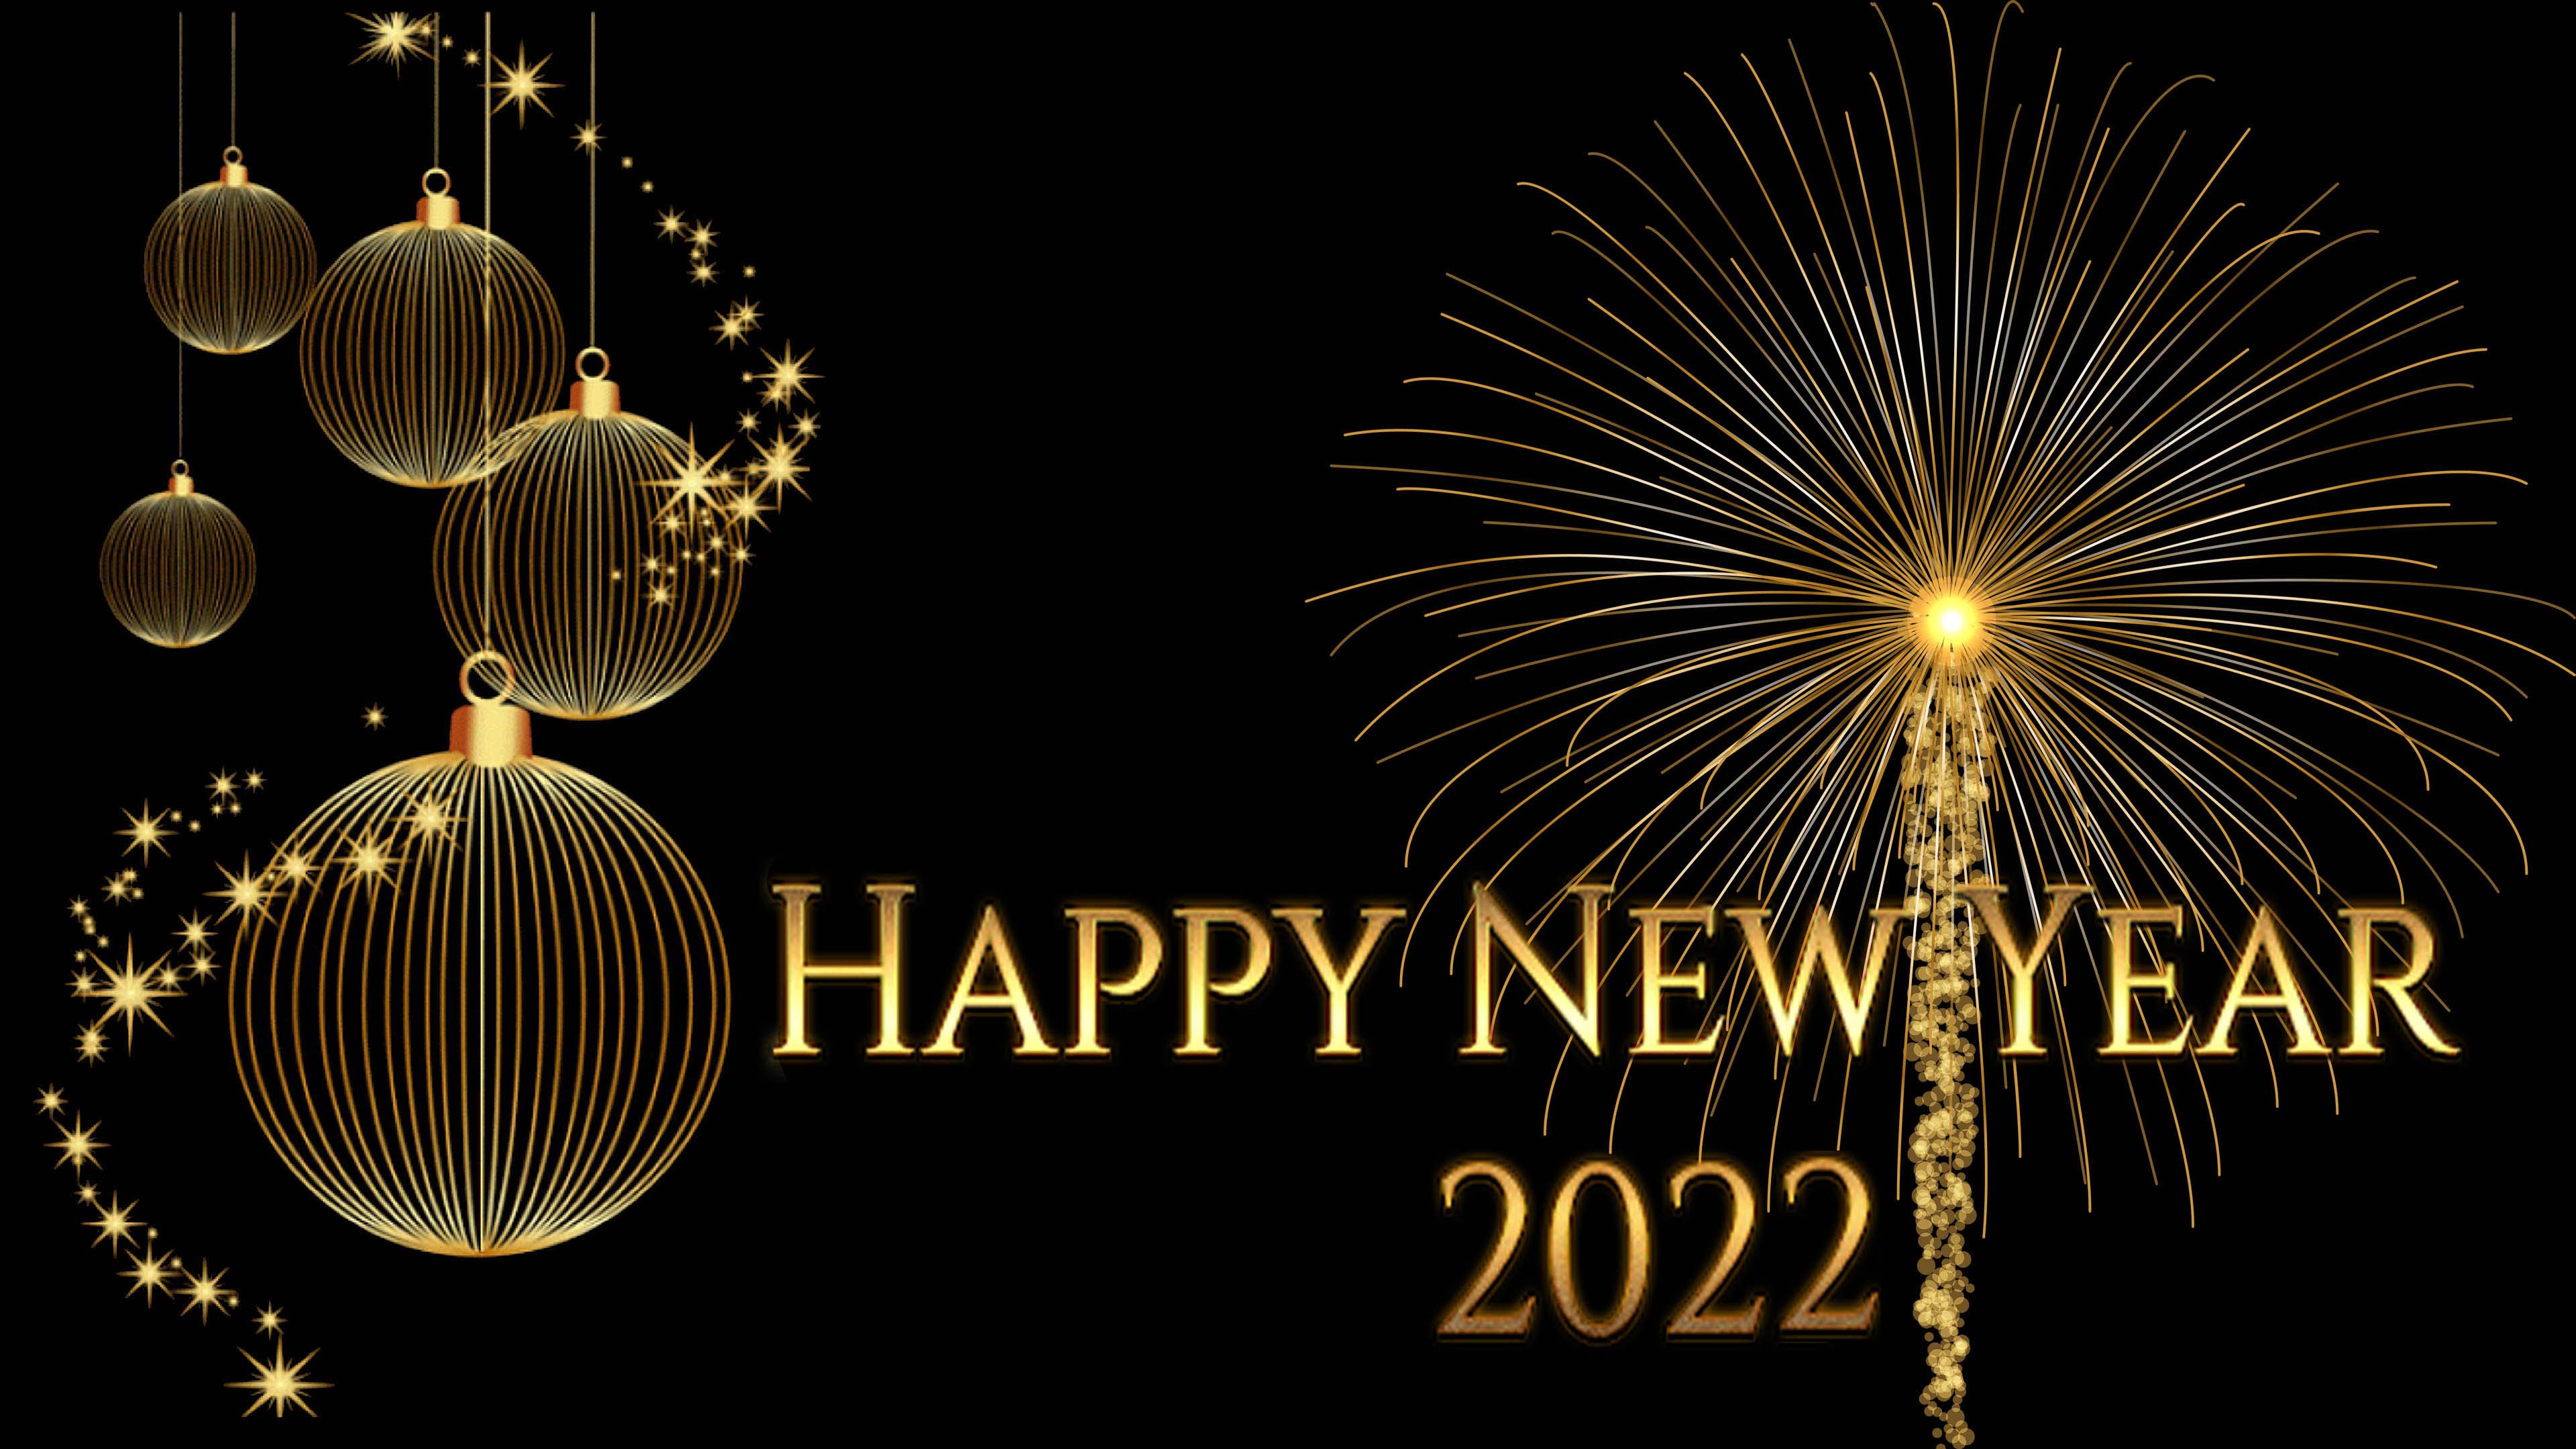  Happy New Year 2022: Wishes, Images 2 